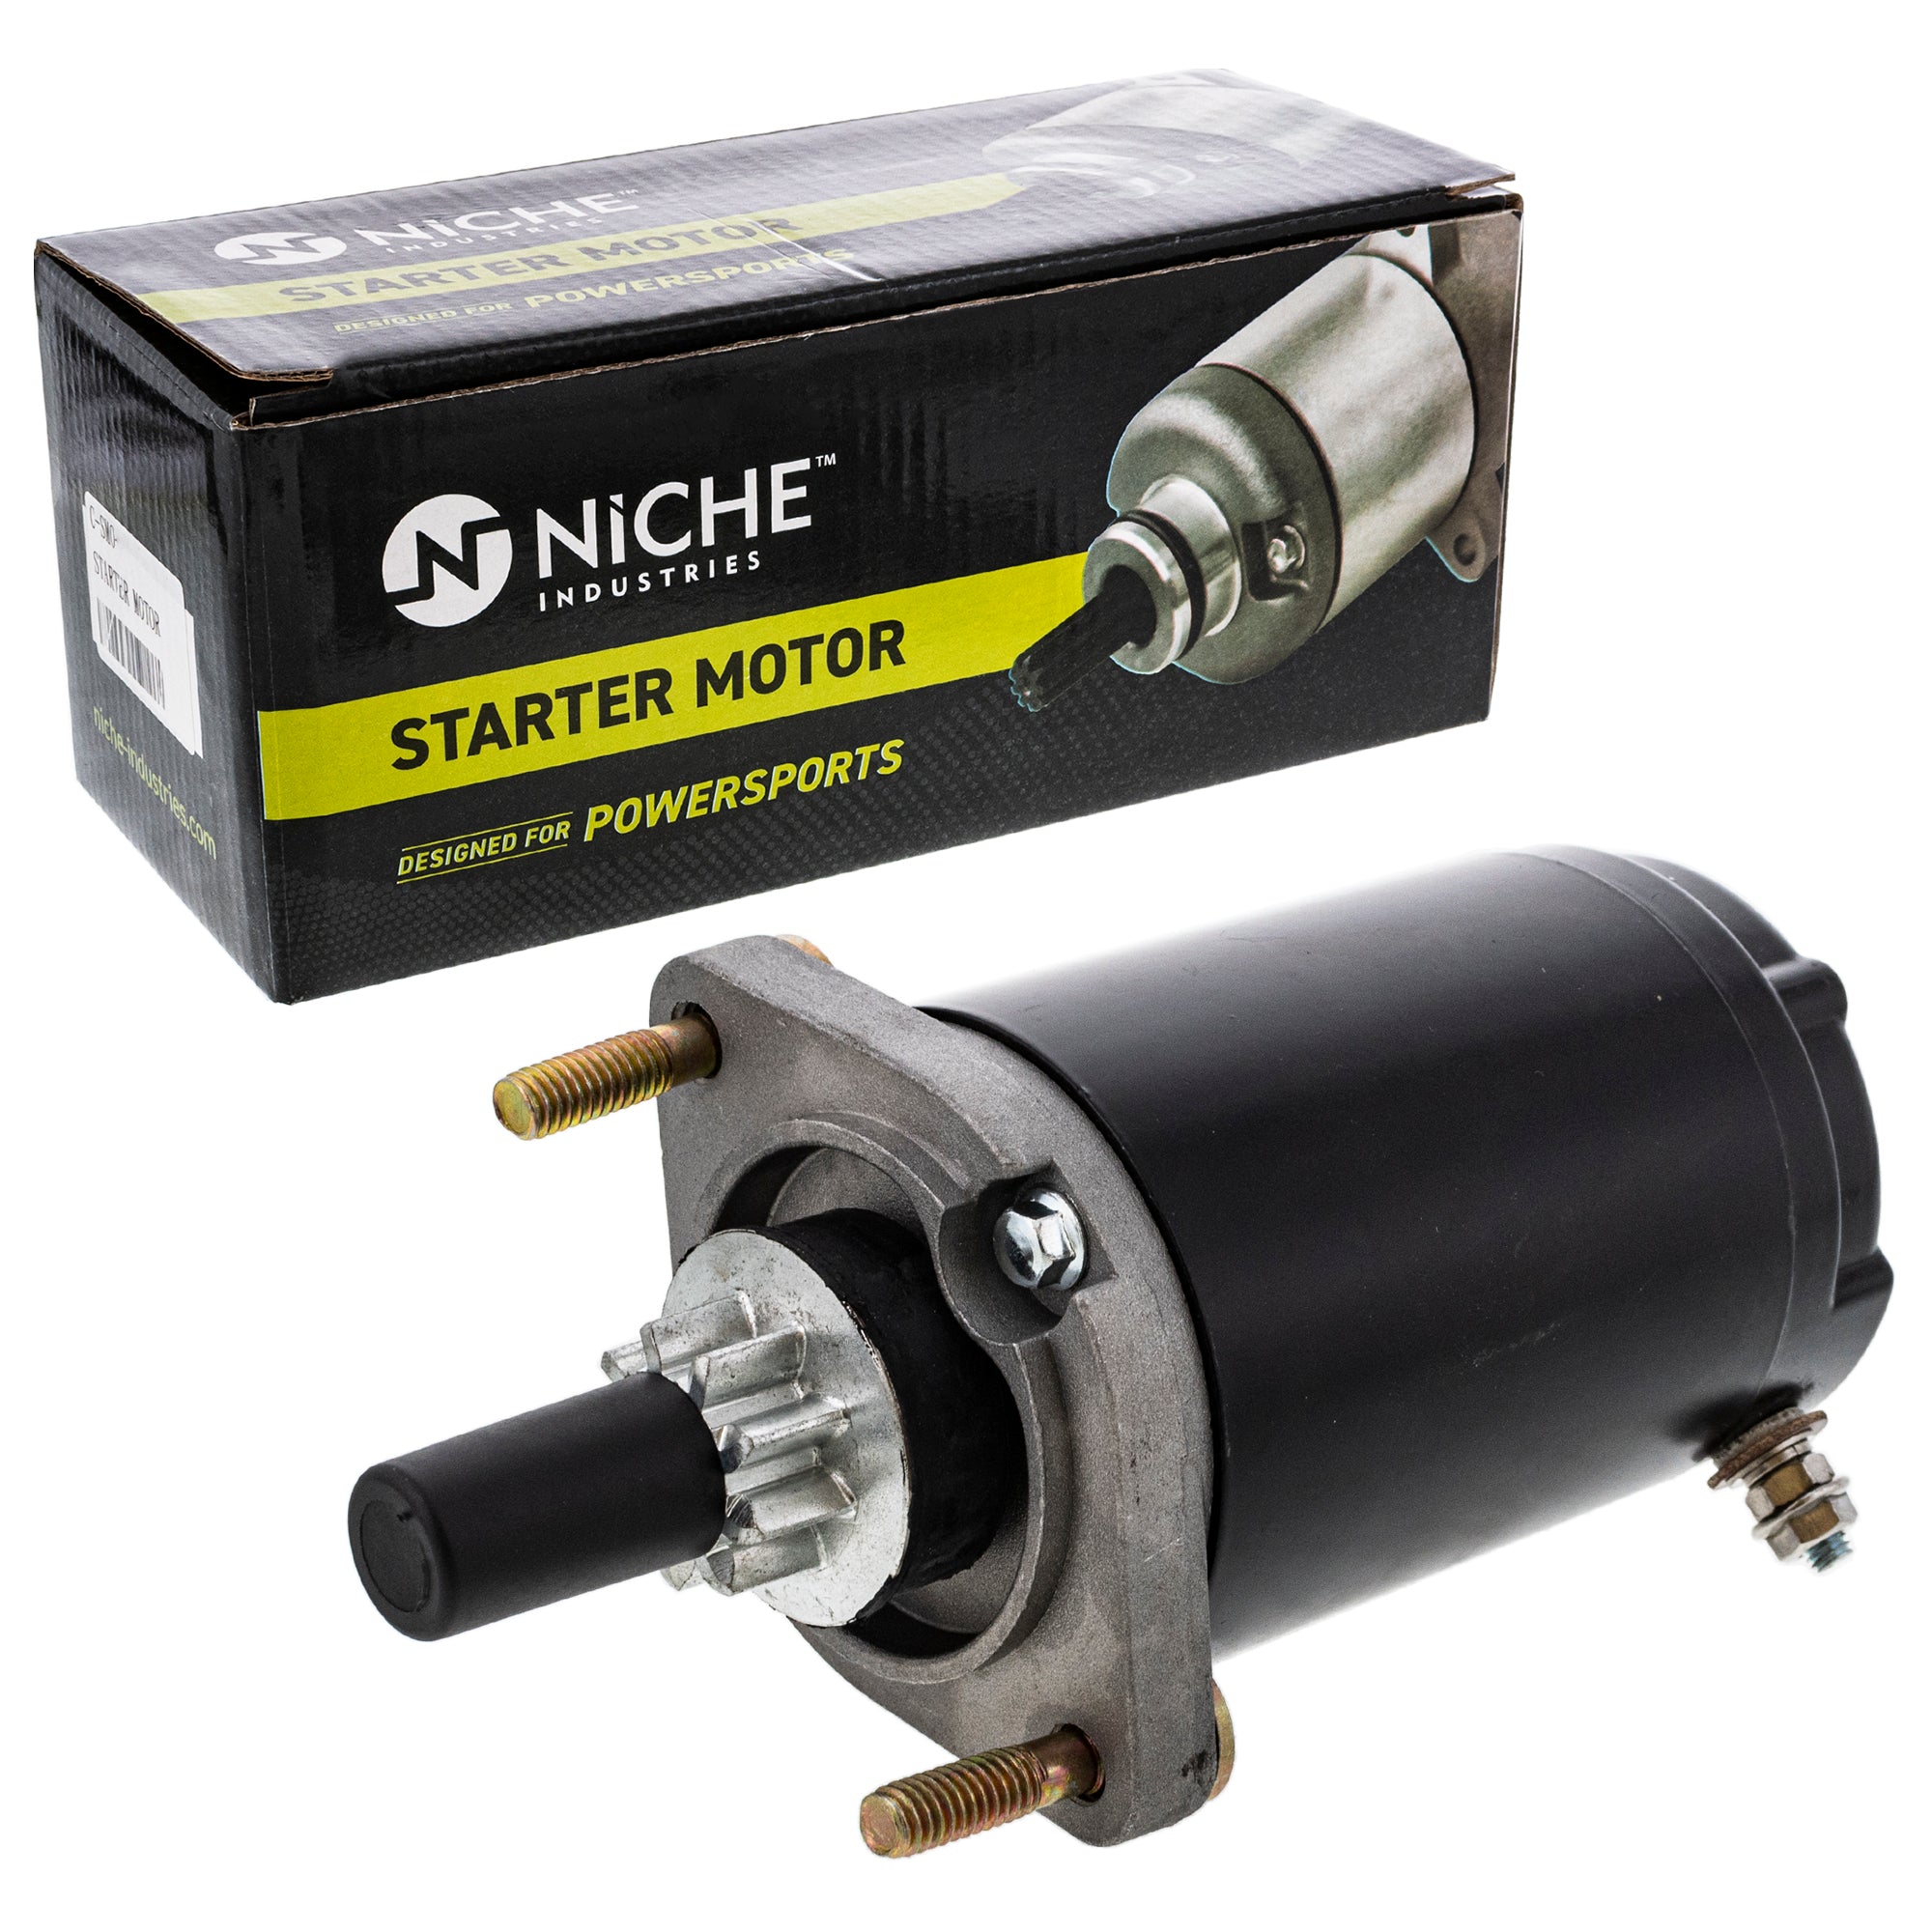 Starter Motor Assembly for zOTHER Arrowhead Arctic Cat Textron Cat 0745-357 0745-052 NICHE 519-CSM2271O